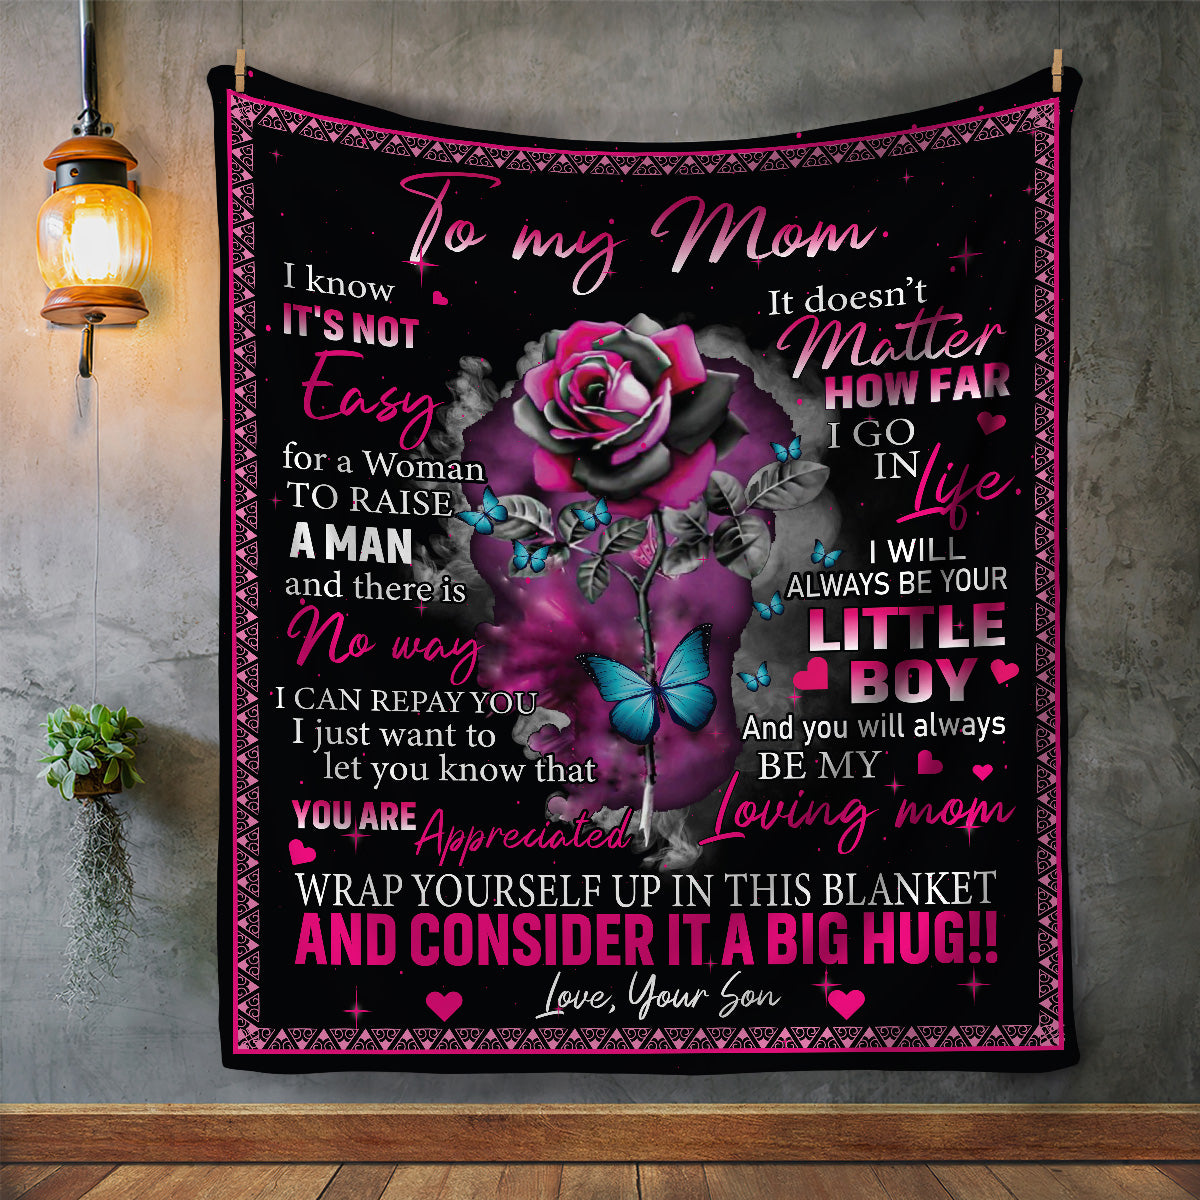 Mom "You Are Appreciated" Blanket From Son